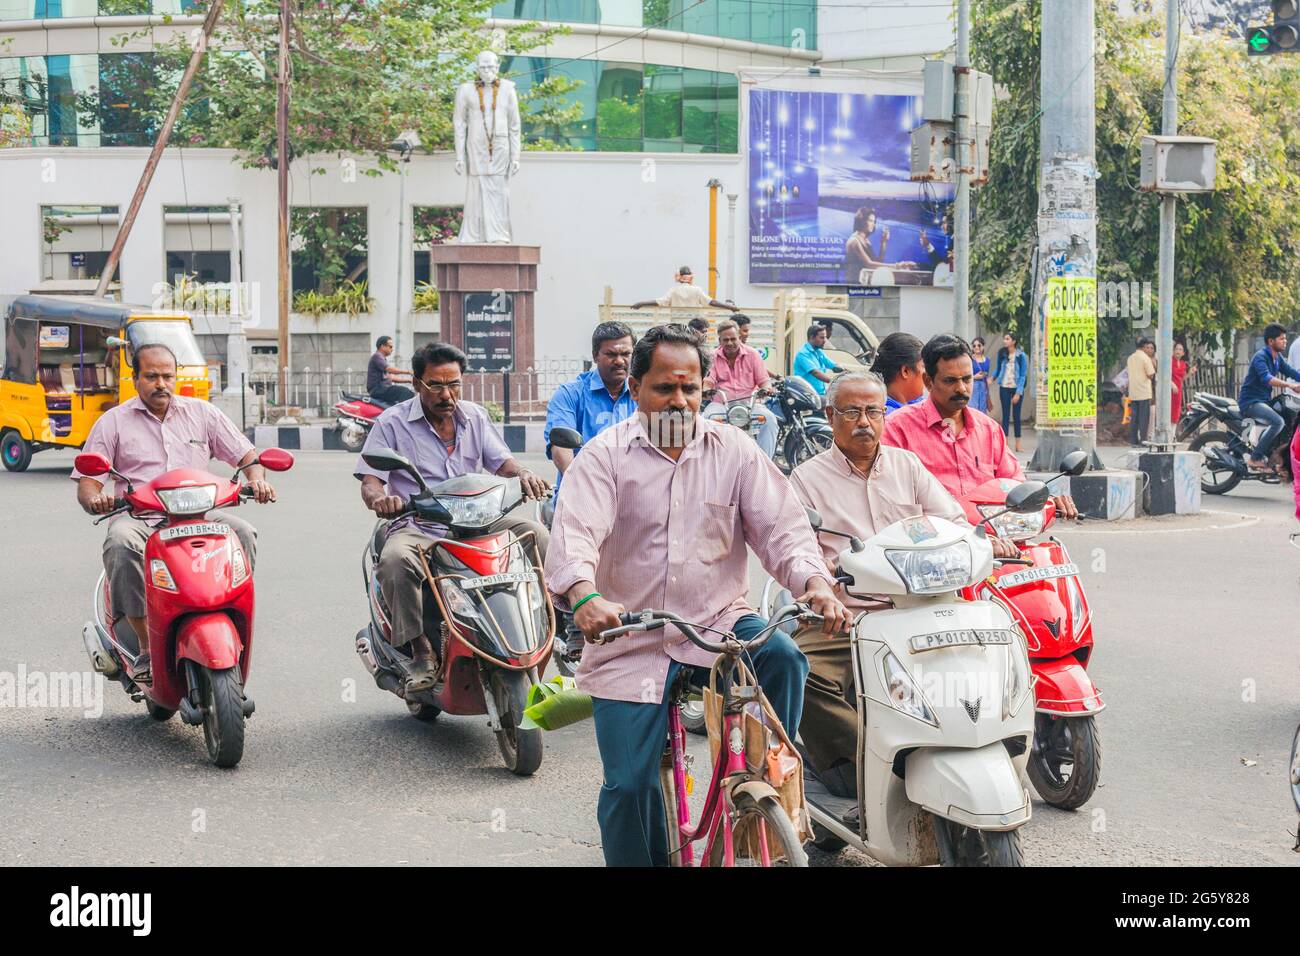 Indian males drive scooters and bicycles during rush hour without crash helmets in traffic, Puducherry (Pondicherry), Tamil Nadu, India Stock Photo